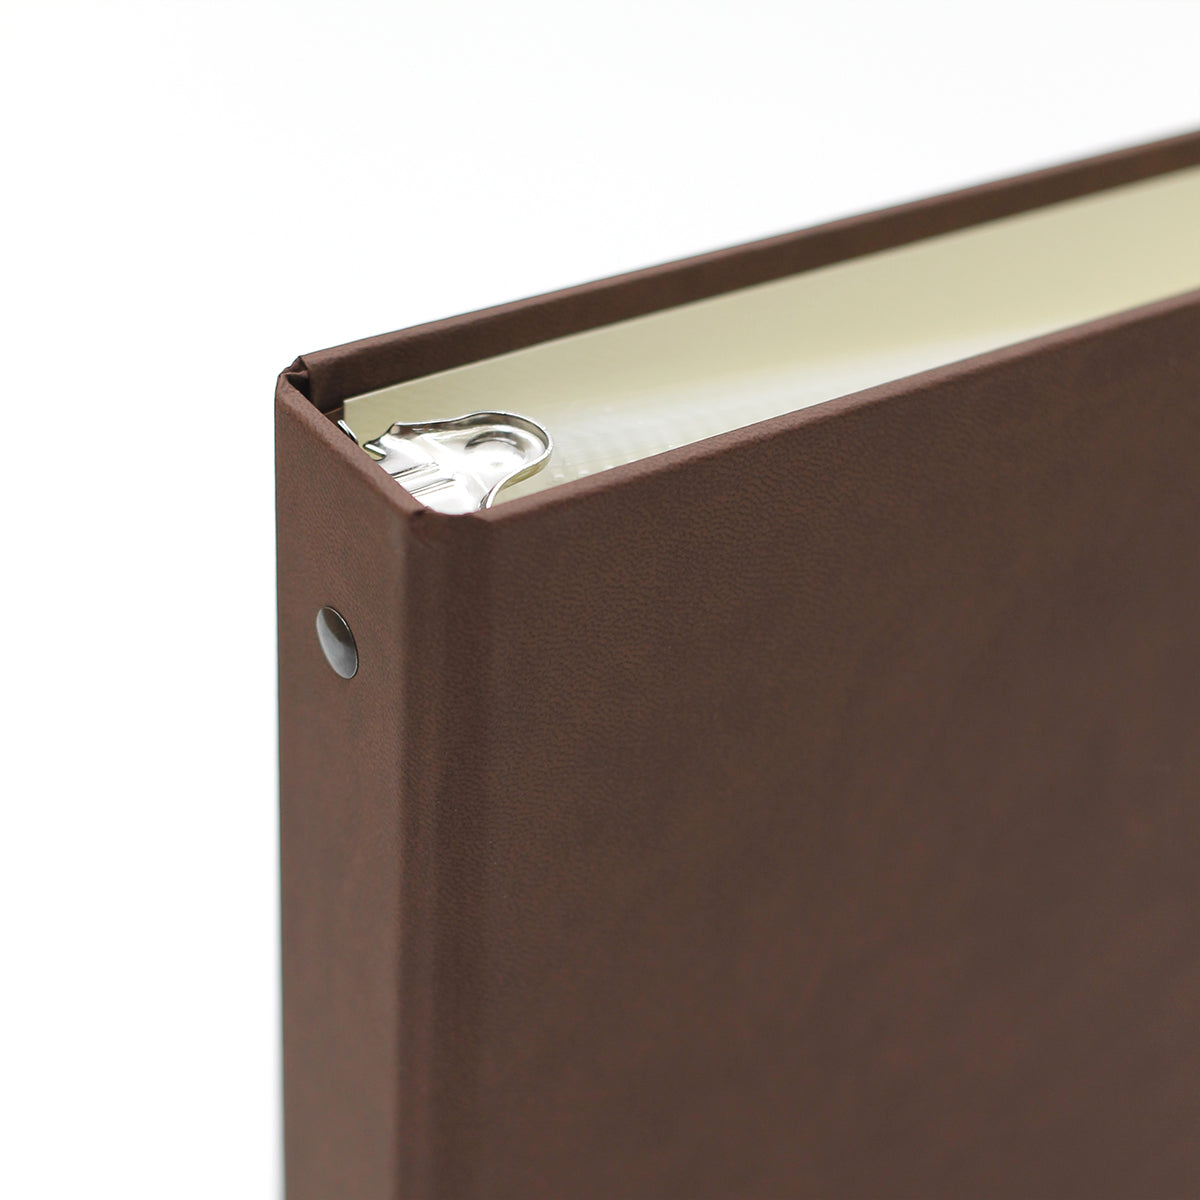 Medium Photo Binder For 4x6 Photos | Cover: Mocha Vegan Leather | Available Personalized